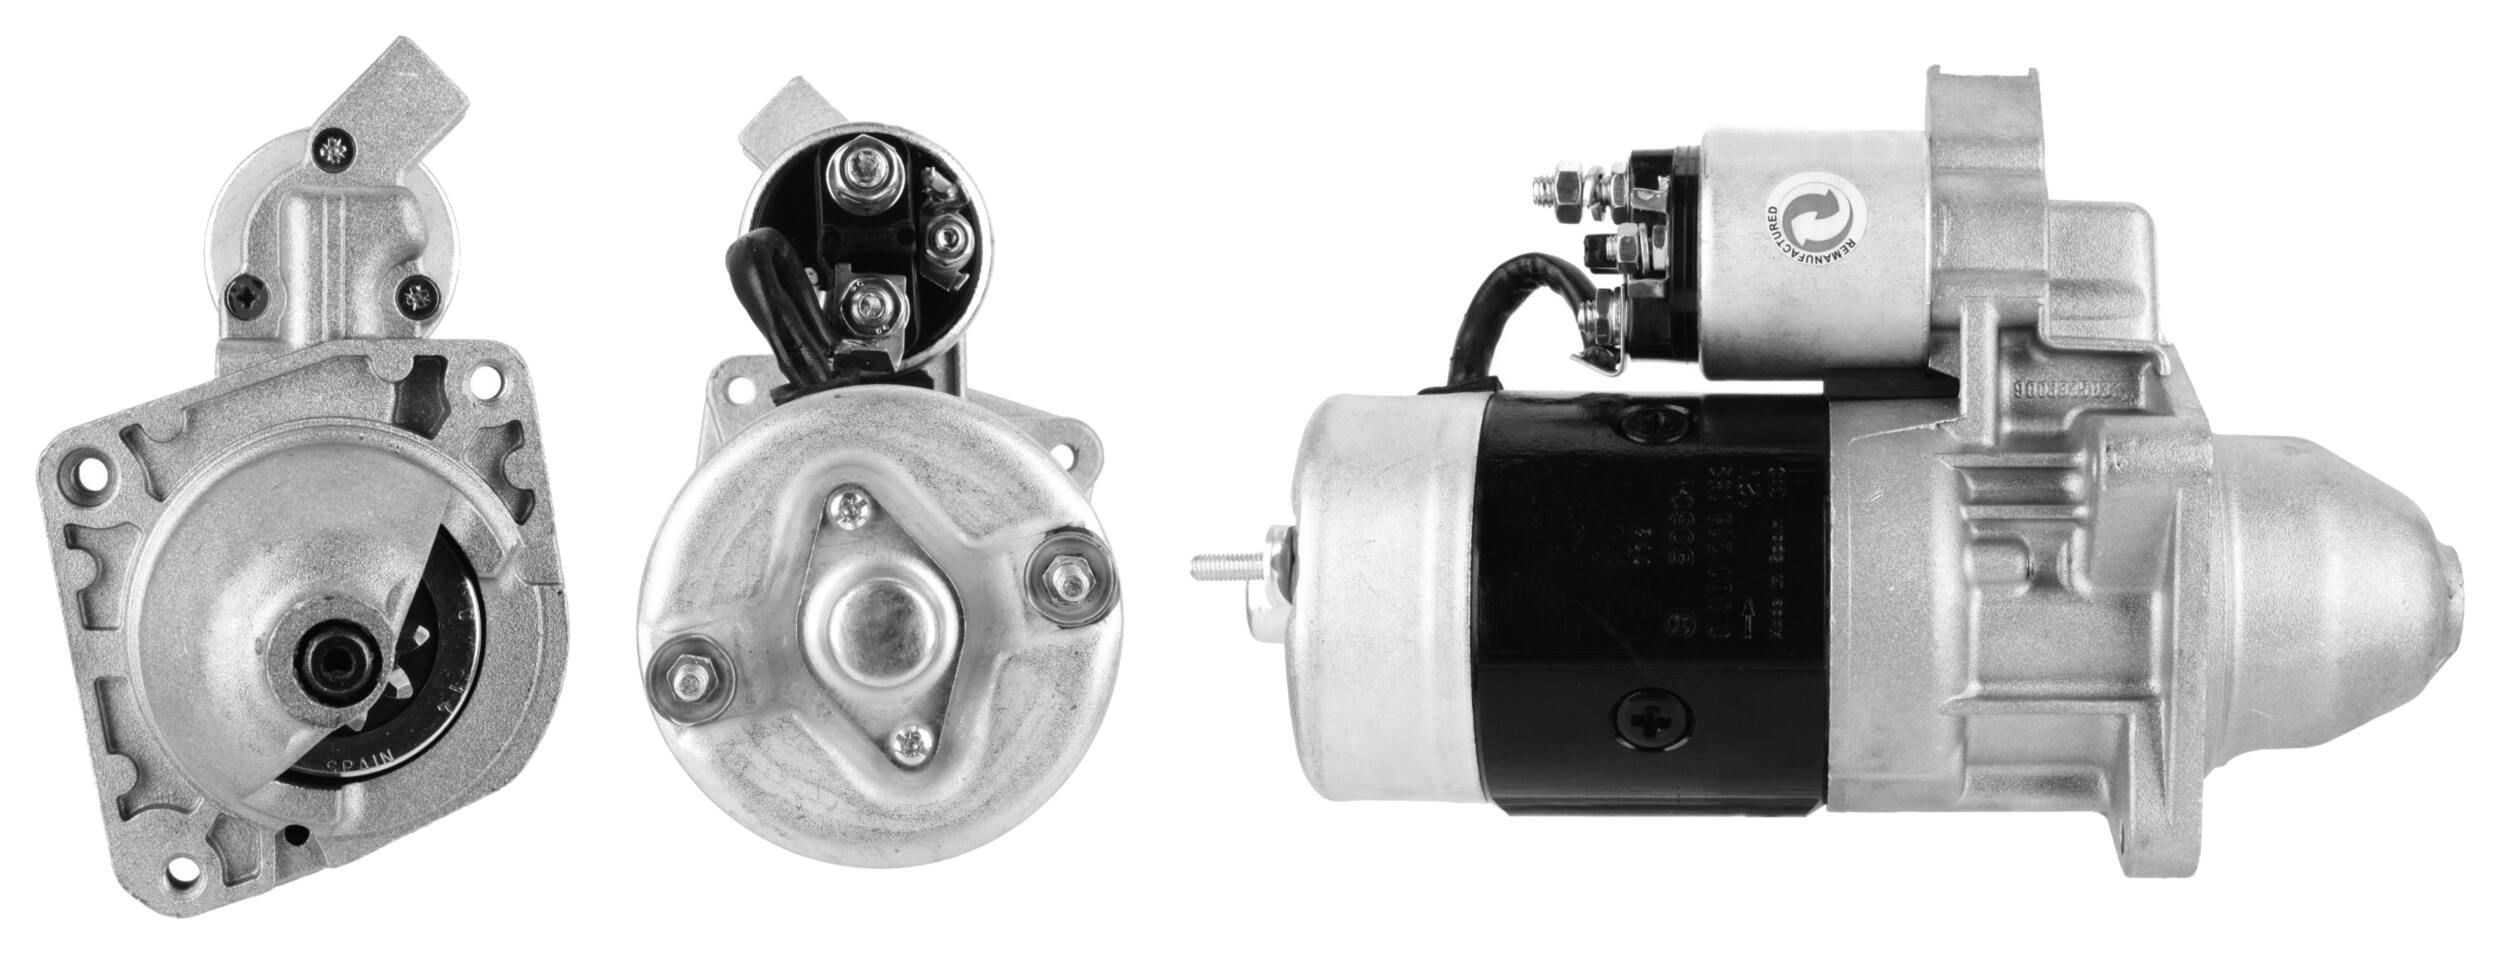 DRI 318052092 Starter motor PEUGEOT experience and price